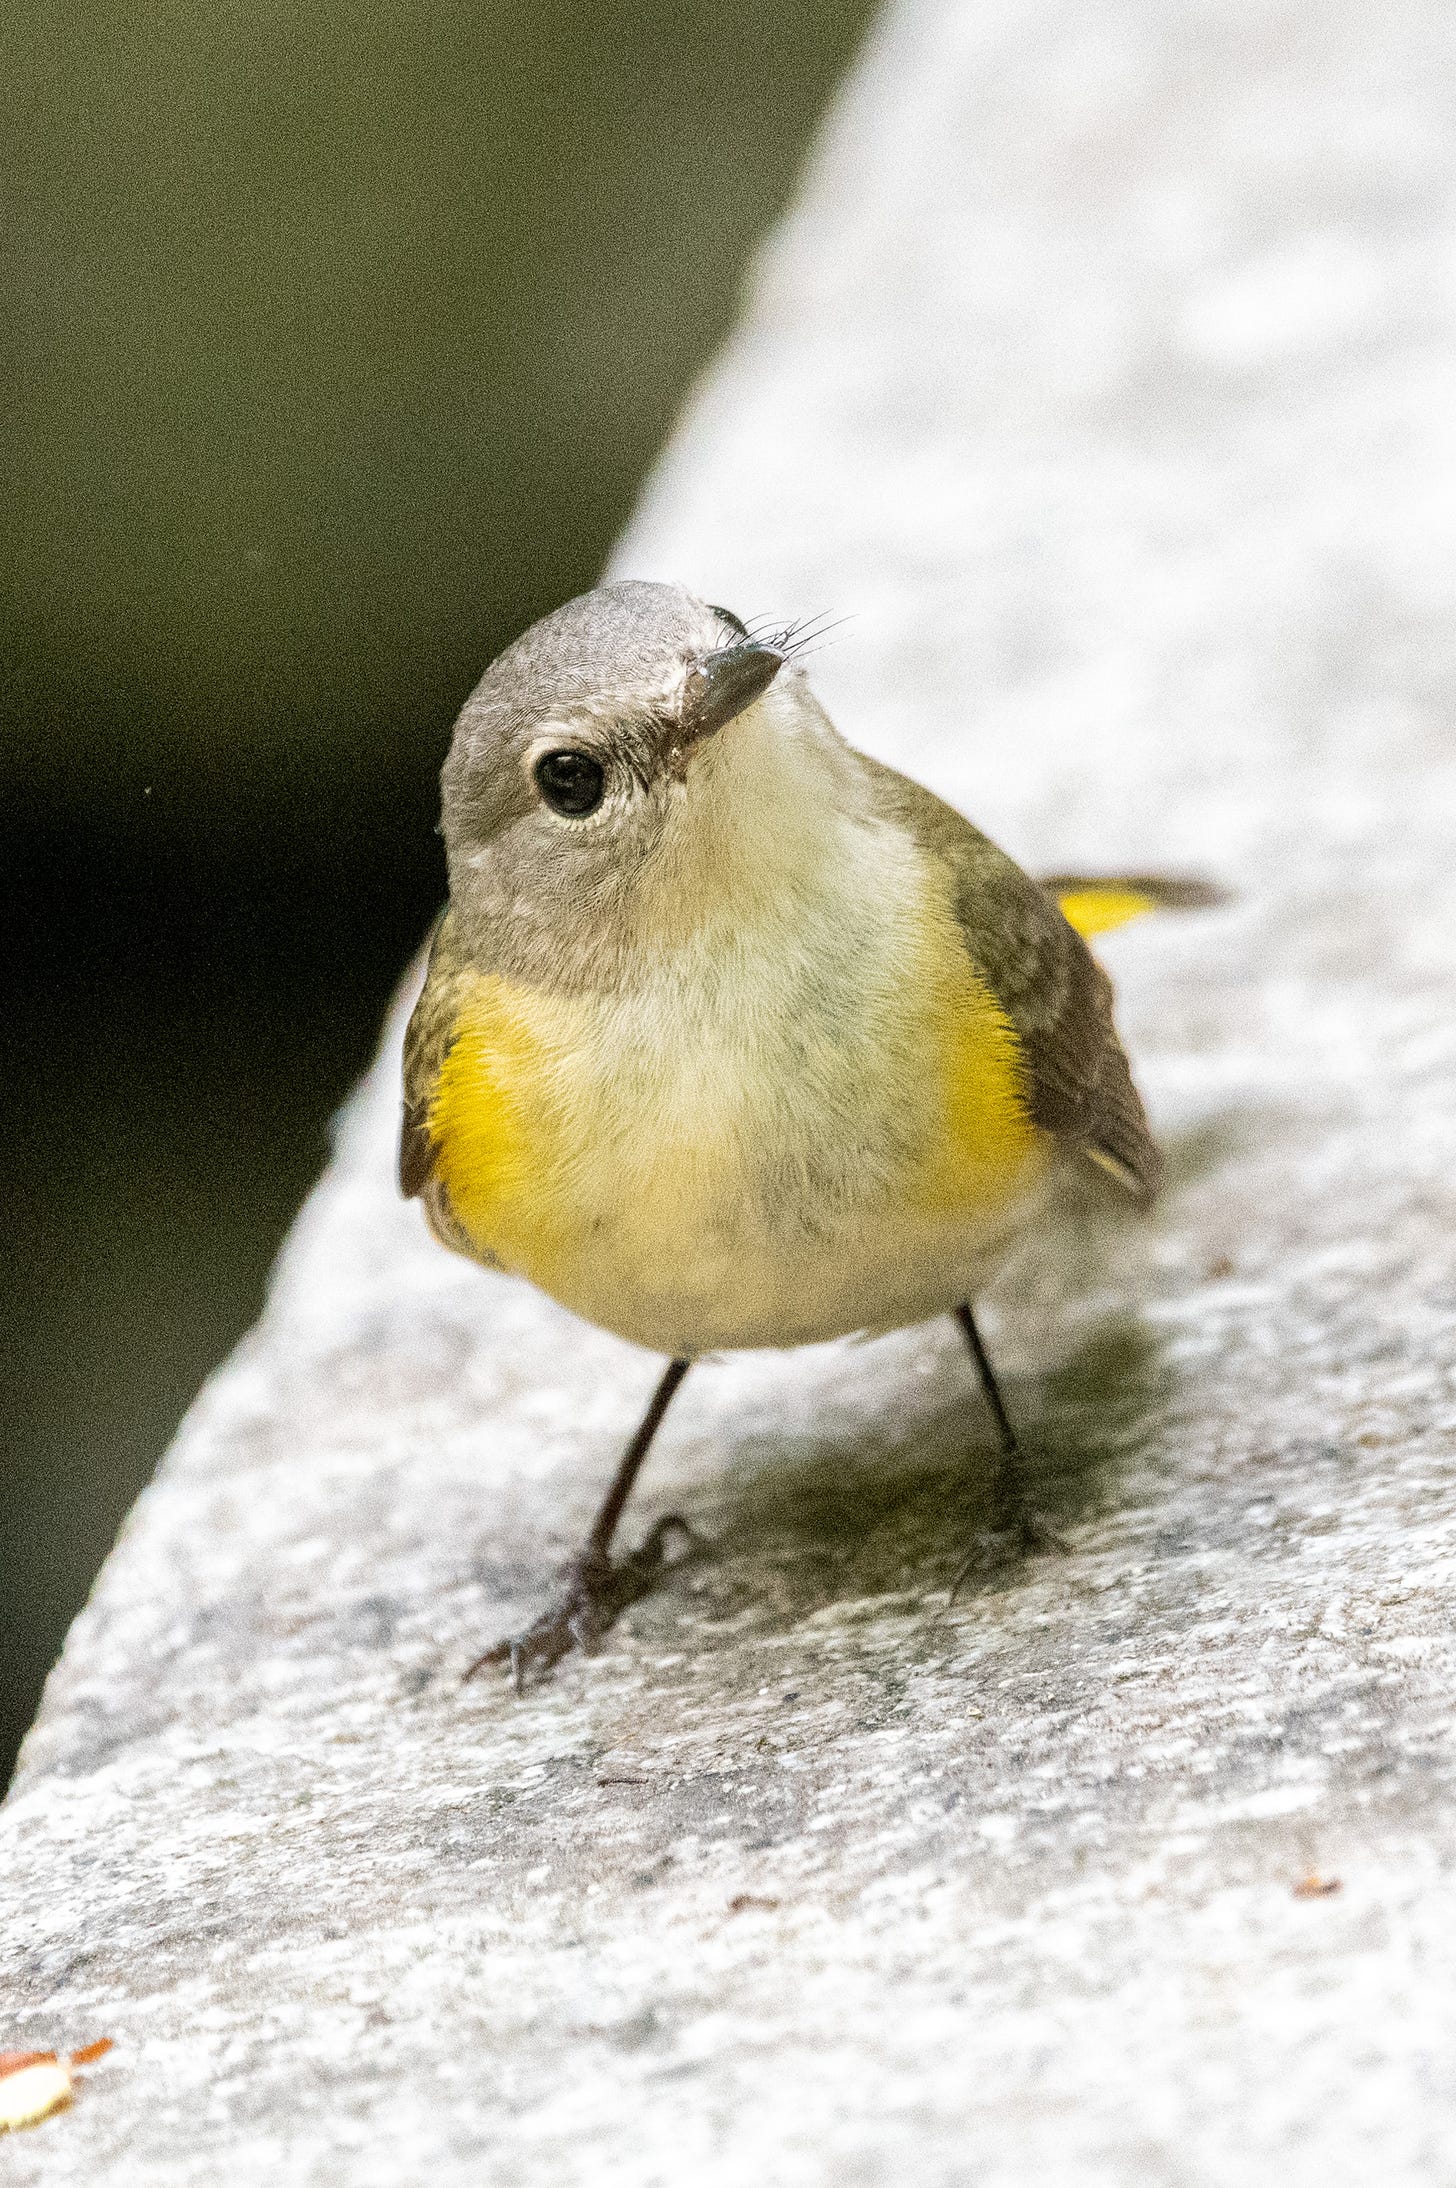 An American redstart with a cocked head